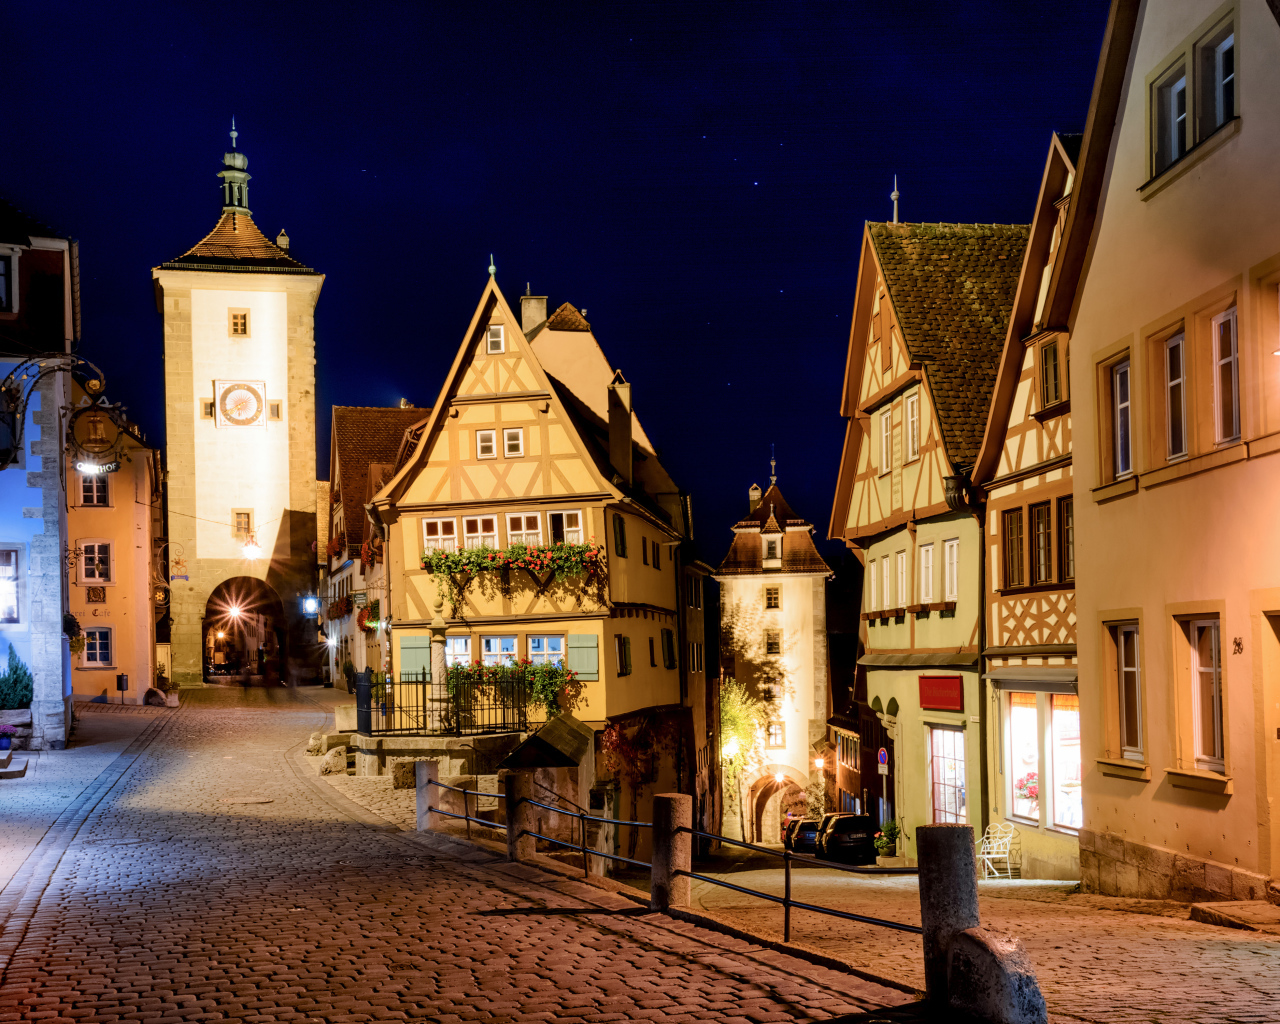 Beautiful houses on the night street of Rothenburg city, Germany